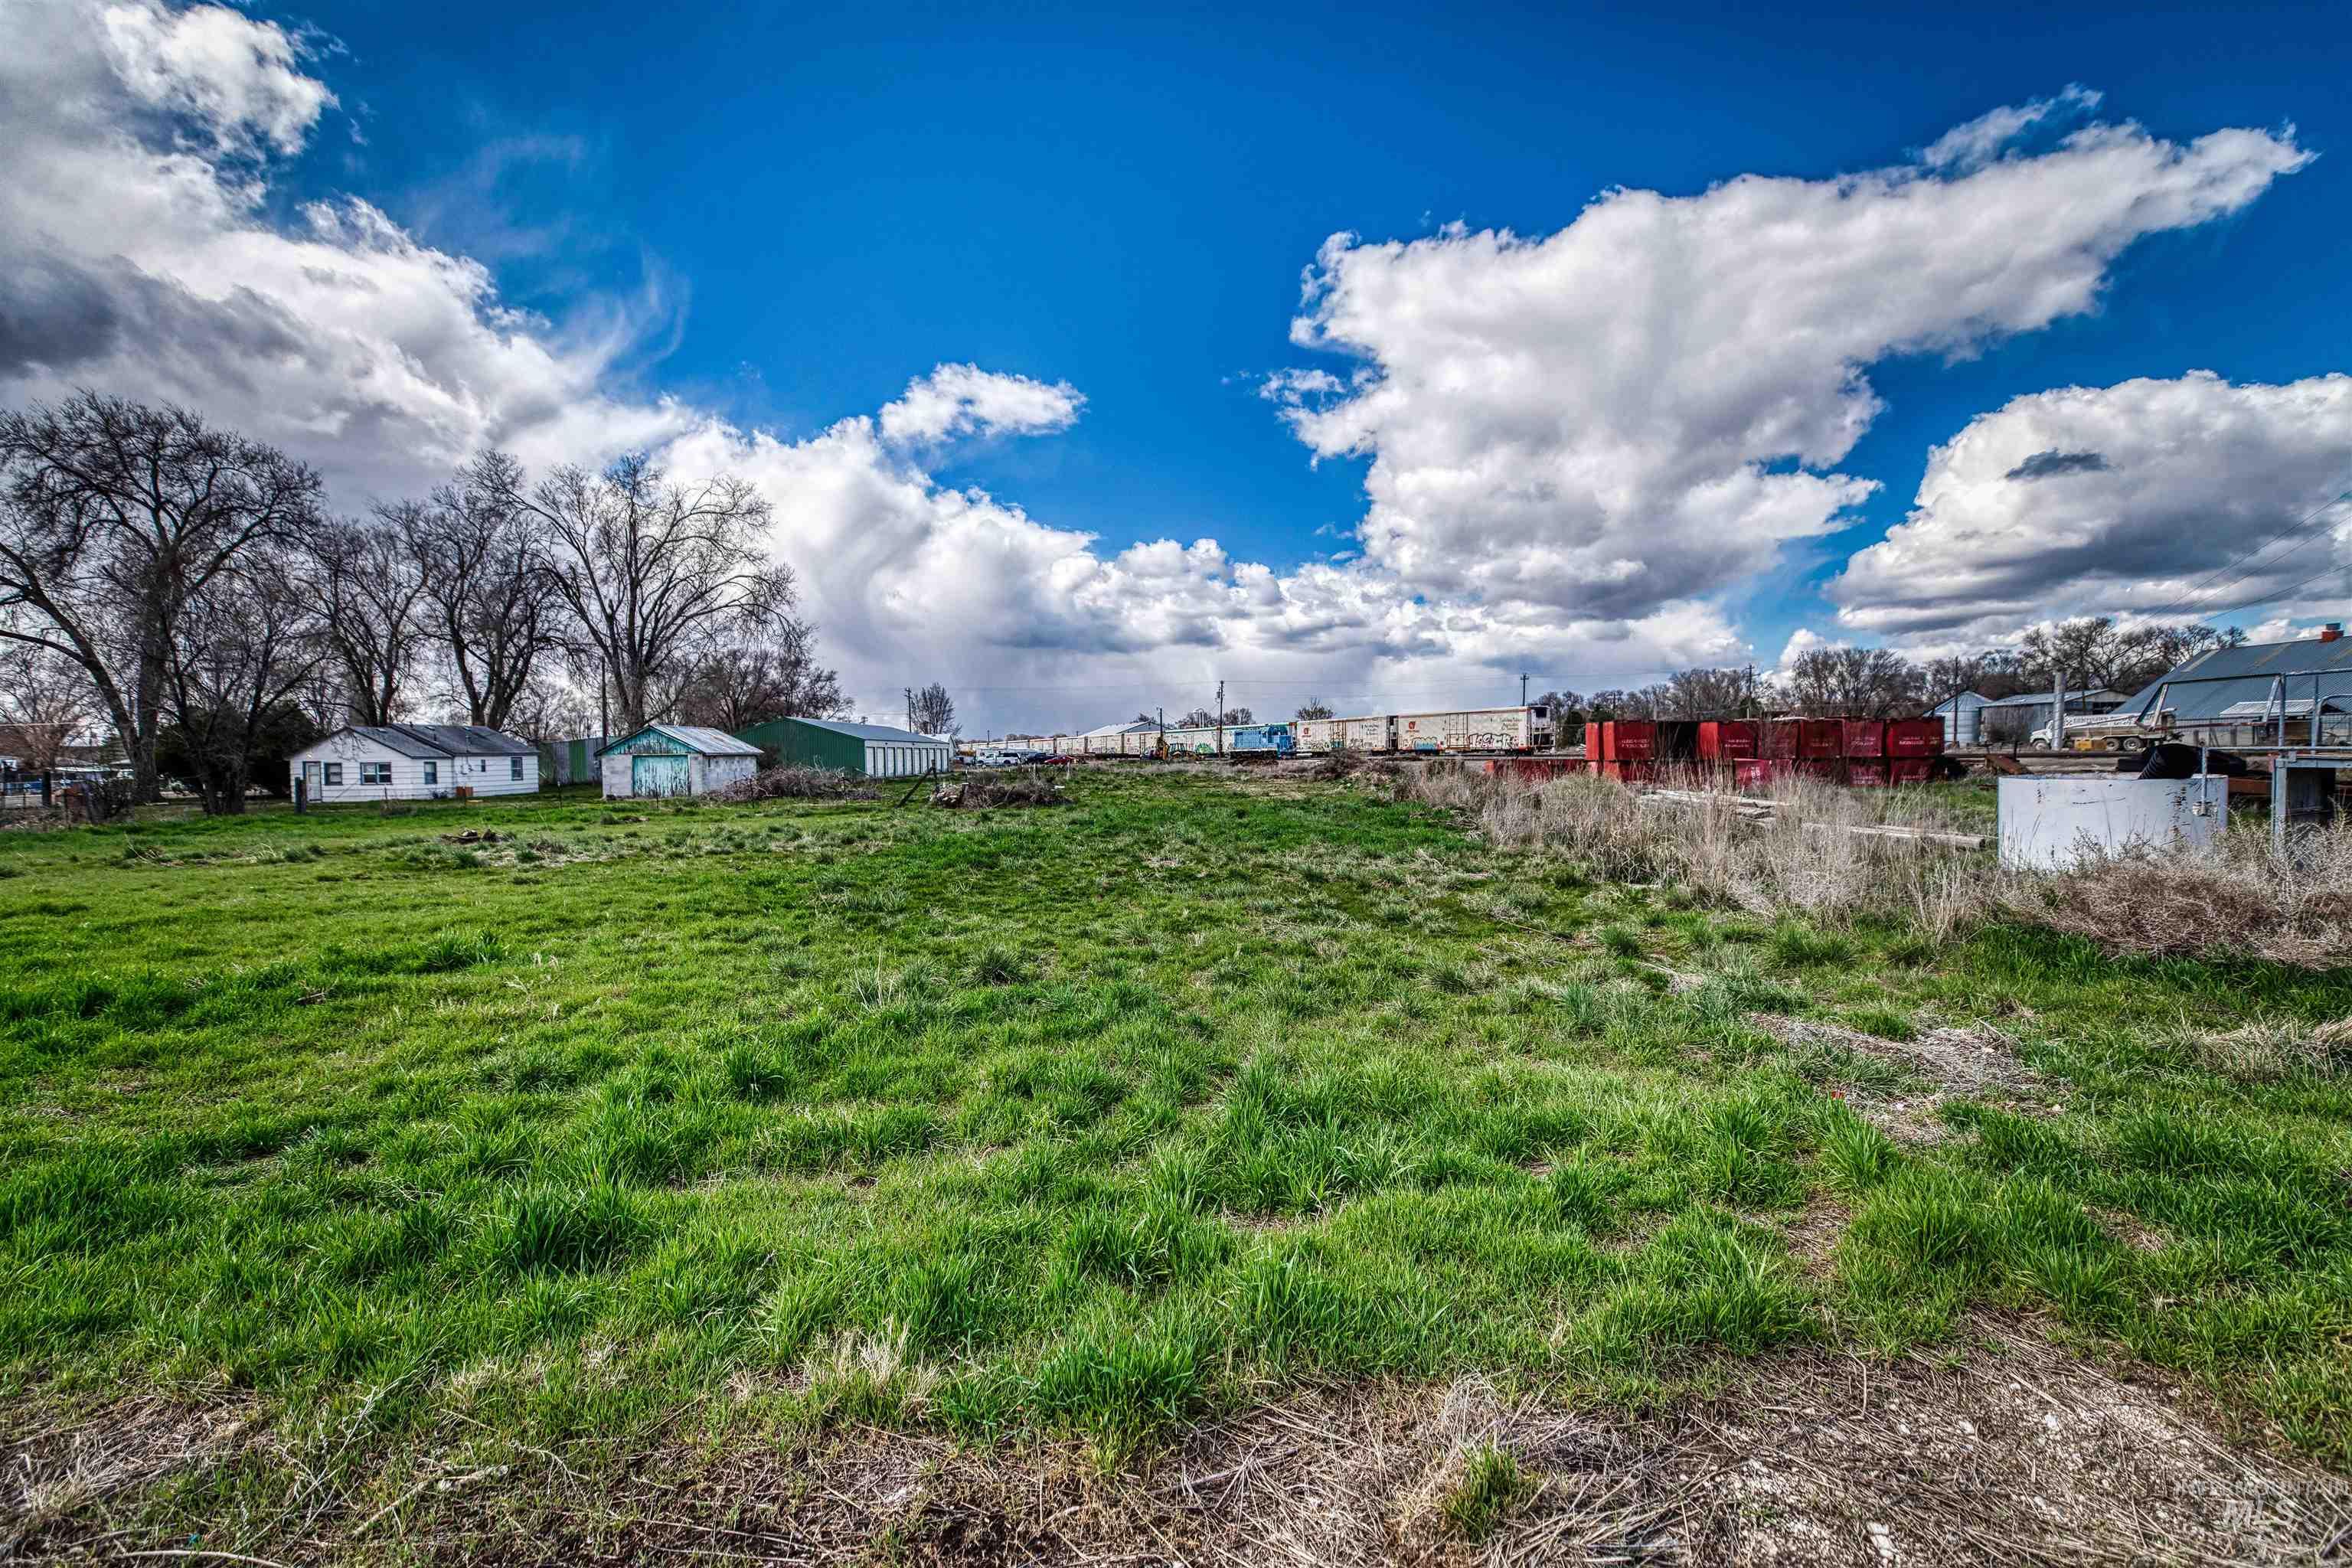 TBD Main St (tax lot 102), Vale, Oregon 97918, Land For Sale, Price $15,000,MLS 98904745